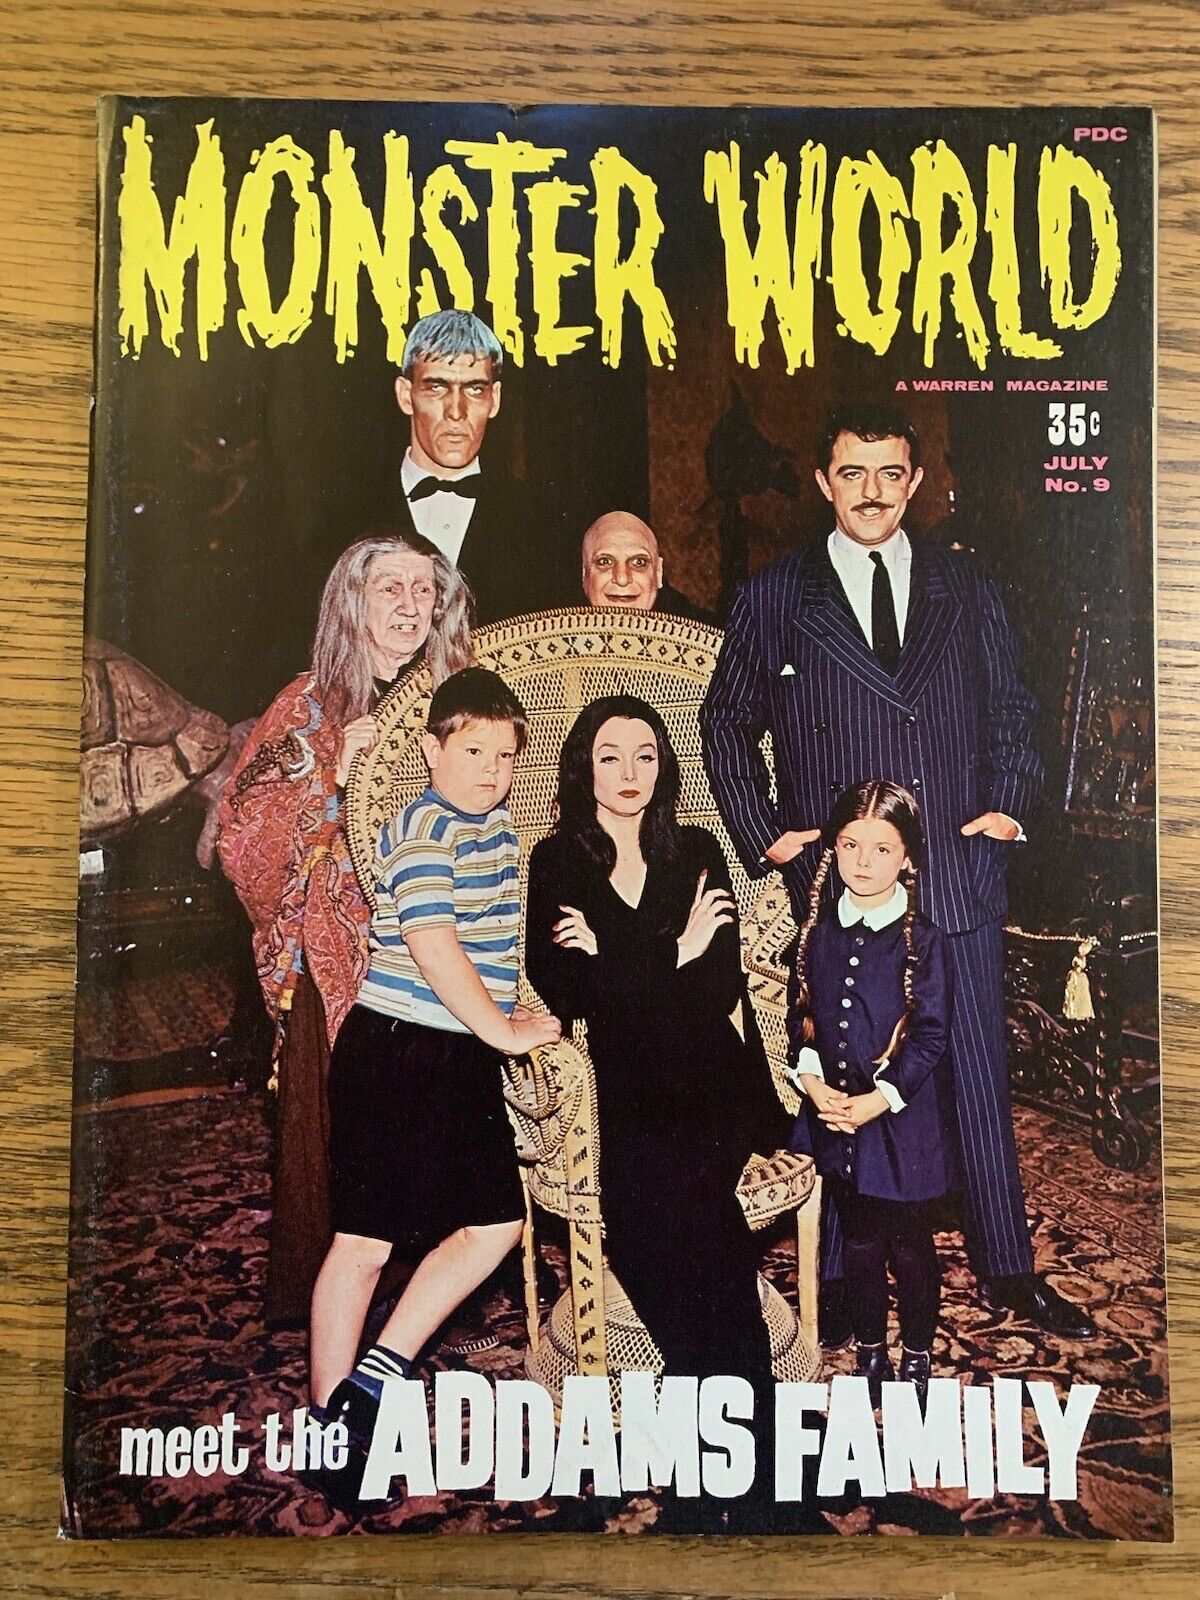 Monster World Magazine #9 July 1966, The Addams Family Issue FN